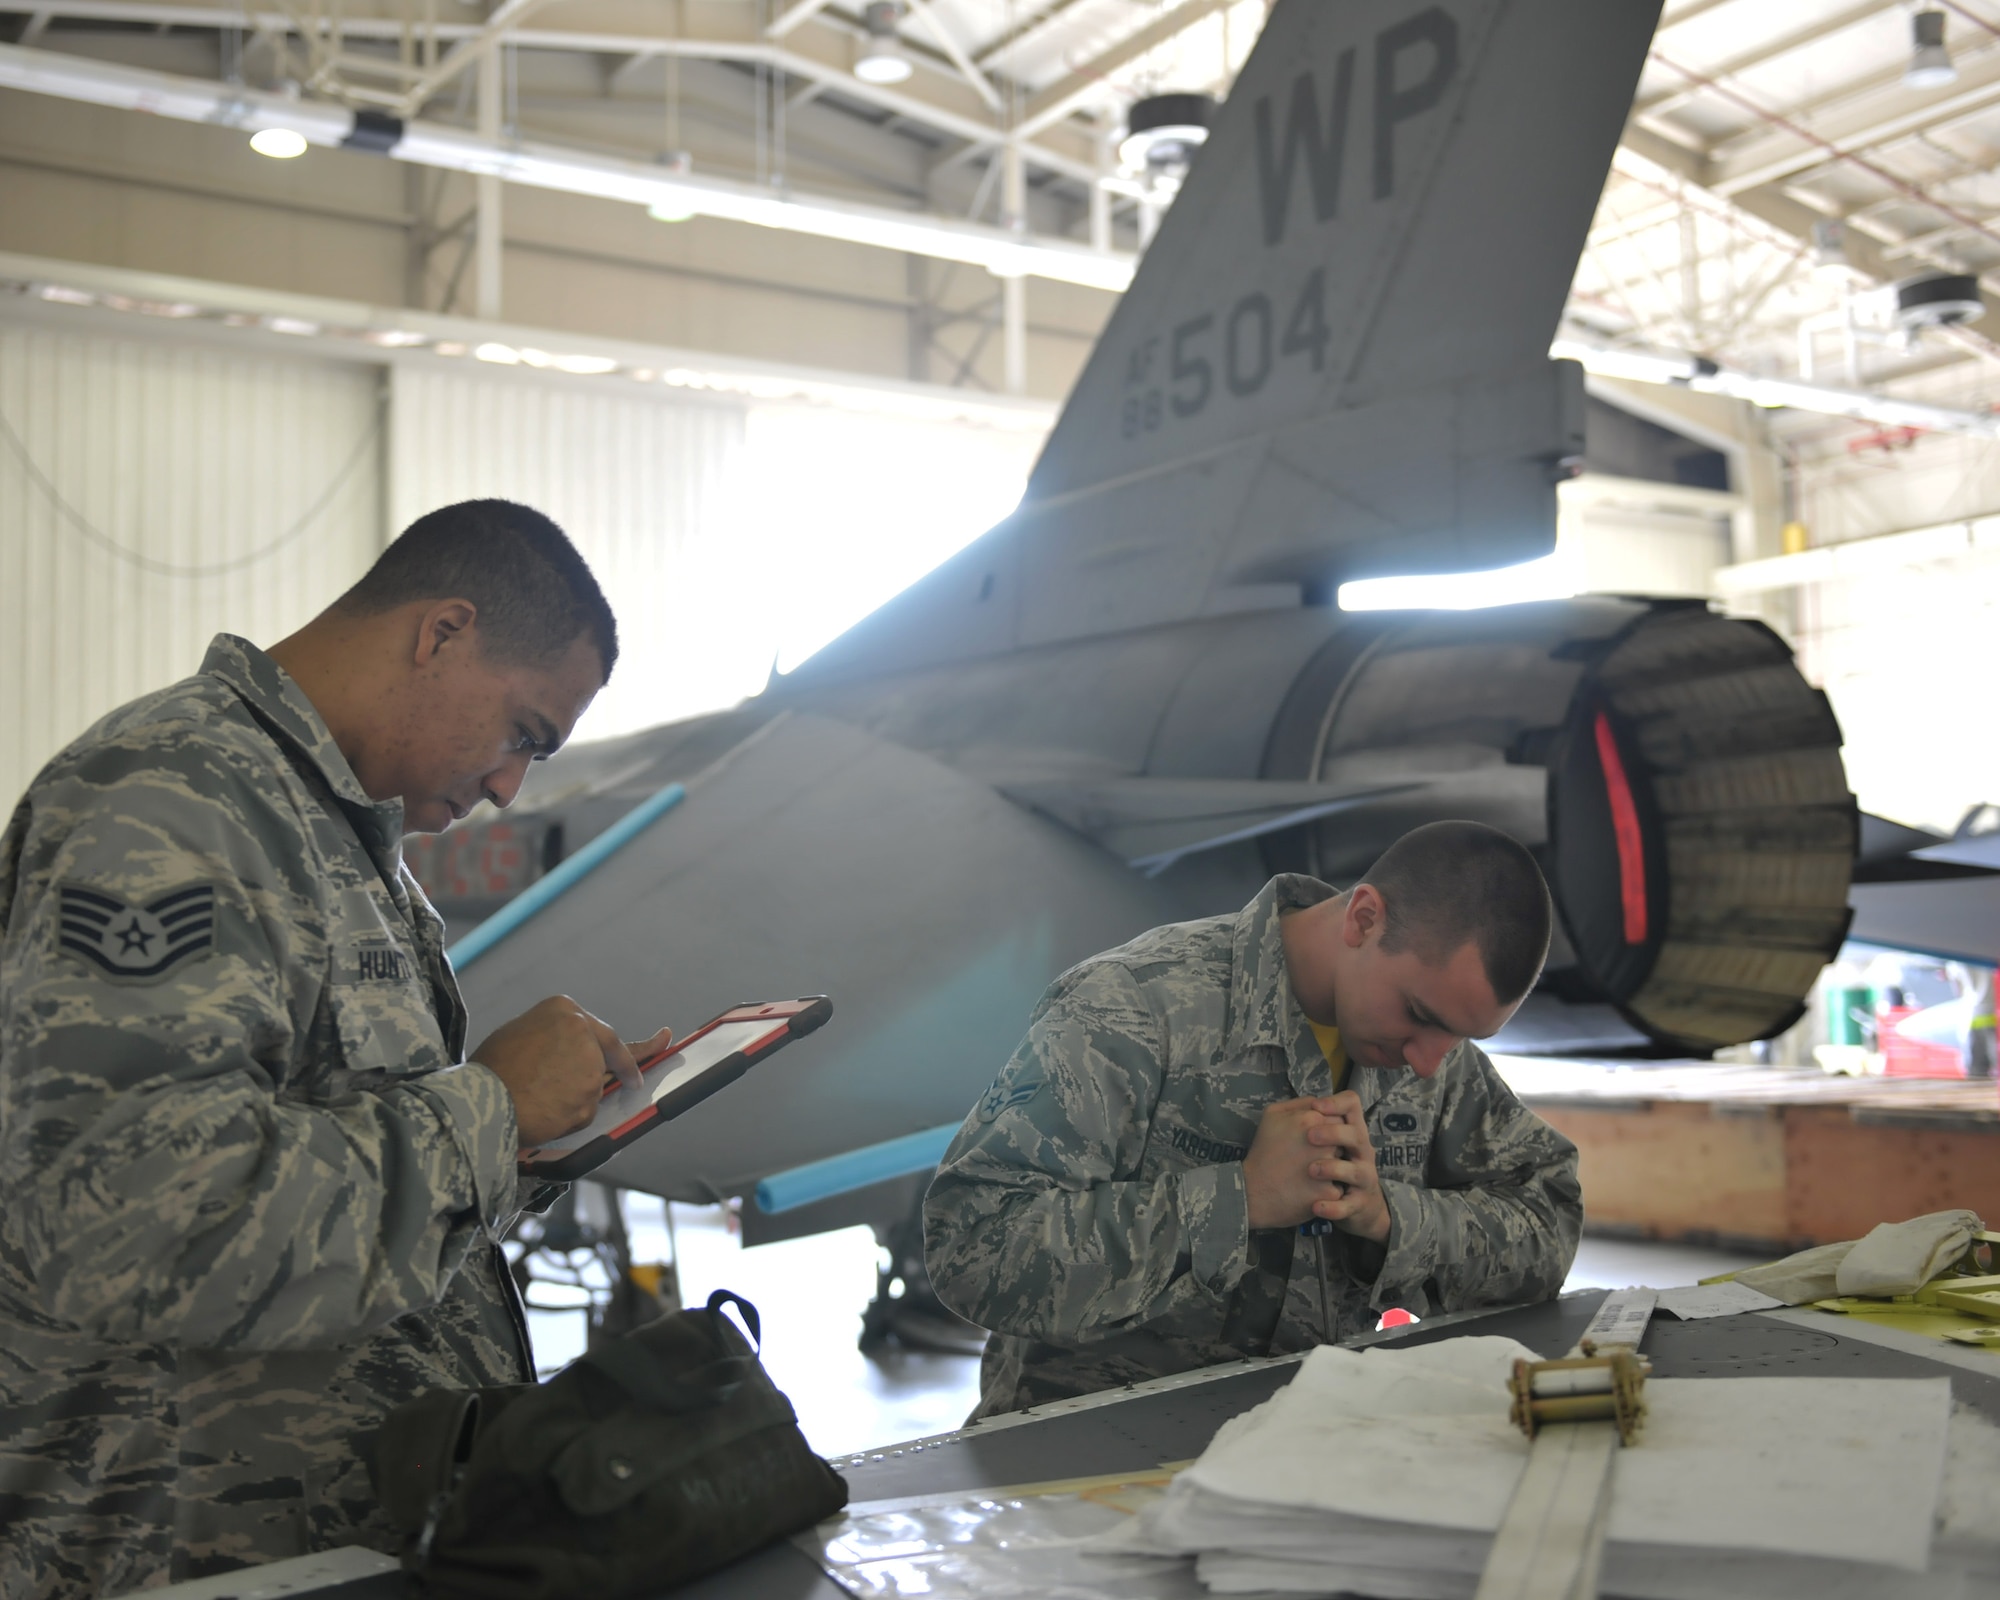 Staff Sgt. Dwight Hunter, 8th Aircraft Maintenance Squadron Aircraft Armament Systems team chief, oversees Airman 1st Class Ismael Fuentes Moran and Airman 1st Class Carson Yarborough, 8th AMXS Aircraft Armament Systems craftsmen, as they install a jettison release interface unit June 24, 2016 at Kunsan Air Base, Republic of Korea. Hunter and his team are working with other maintenance Air Force Specialty Codes on a simultaneous double wing replacement. (U.S. Air Force photo/Master Sgt. David Miller)